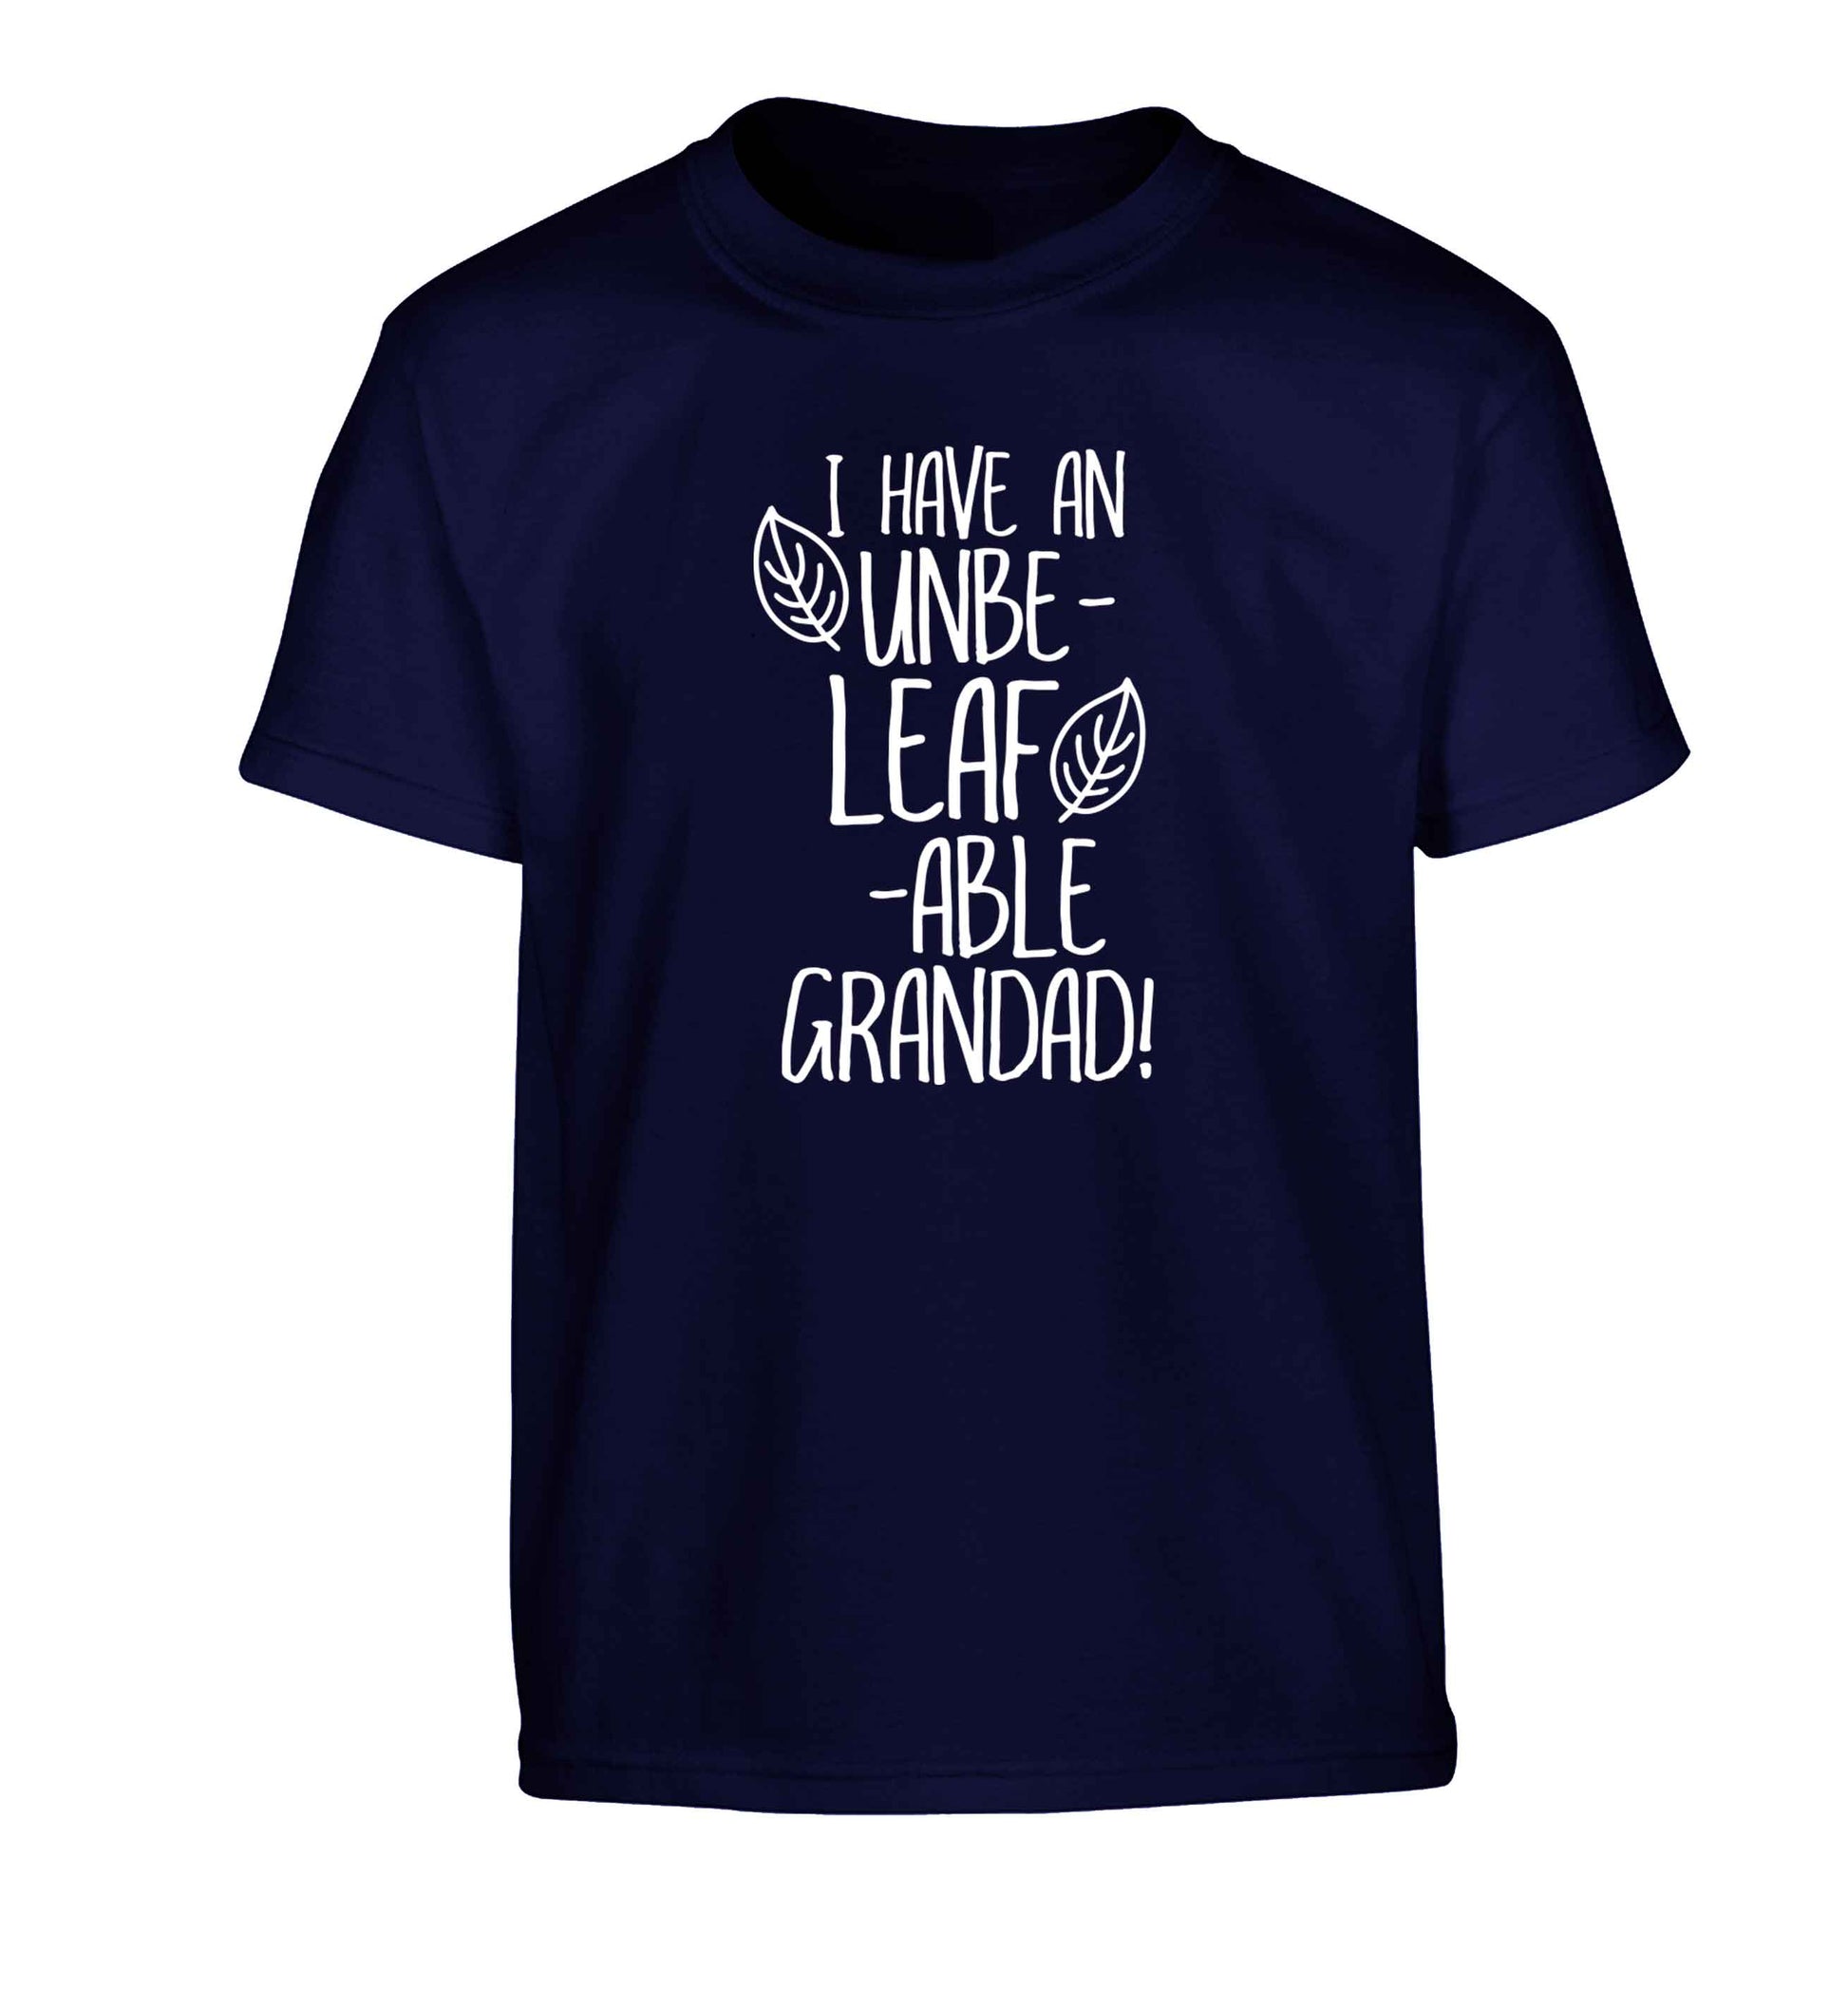 I have an unbe-leaf-able grandad Children's navy Tshirt 12-13 Years